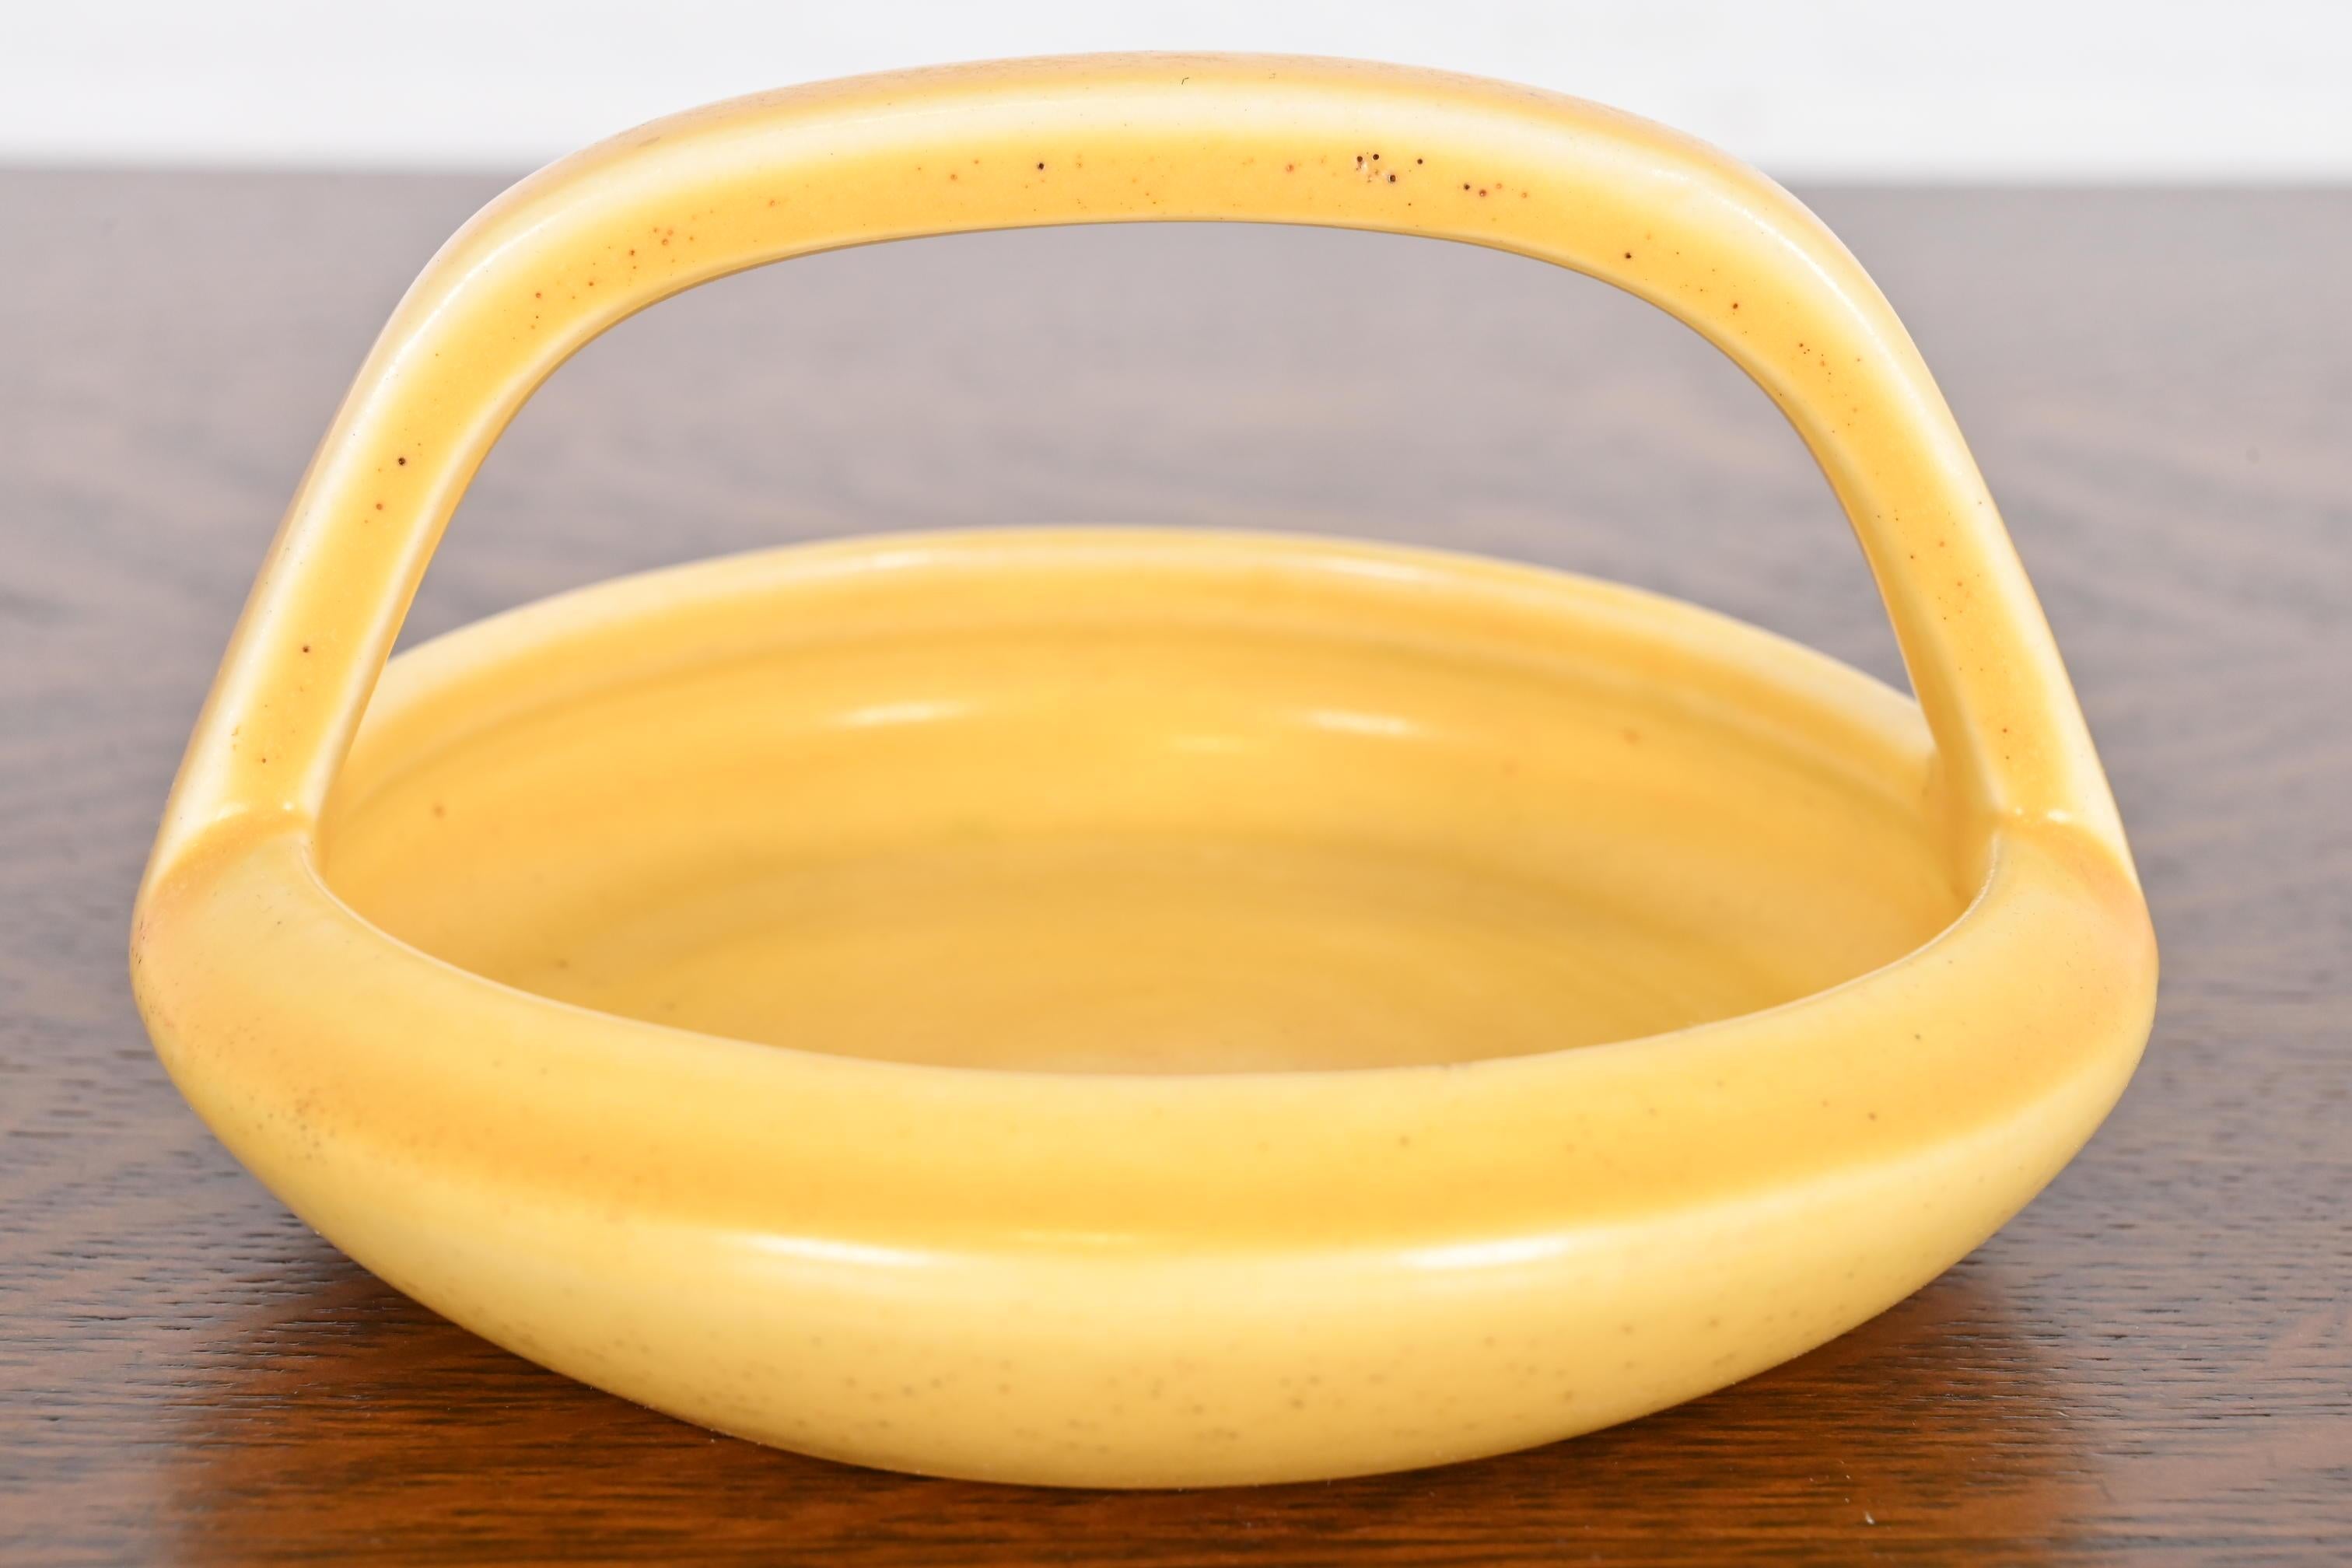 Arts and Crafts Rookwood Pottery Arts & Crafts Glazed Ceramic Yellow Handled Bowl or Ashtray For Sale